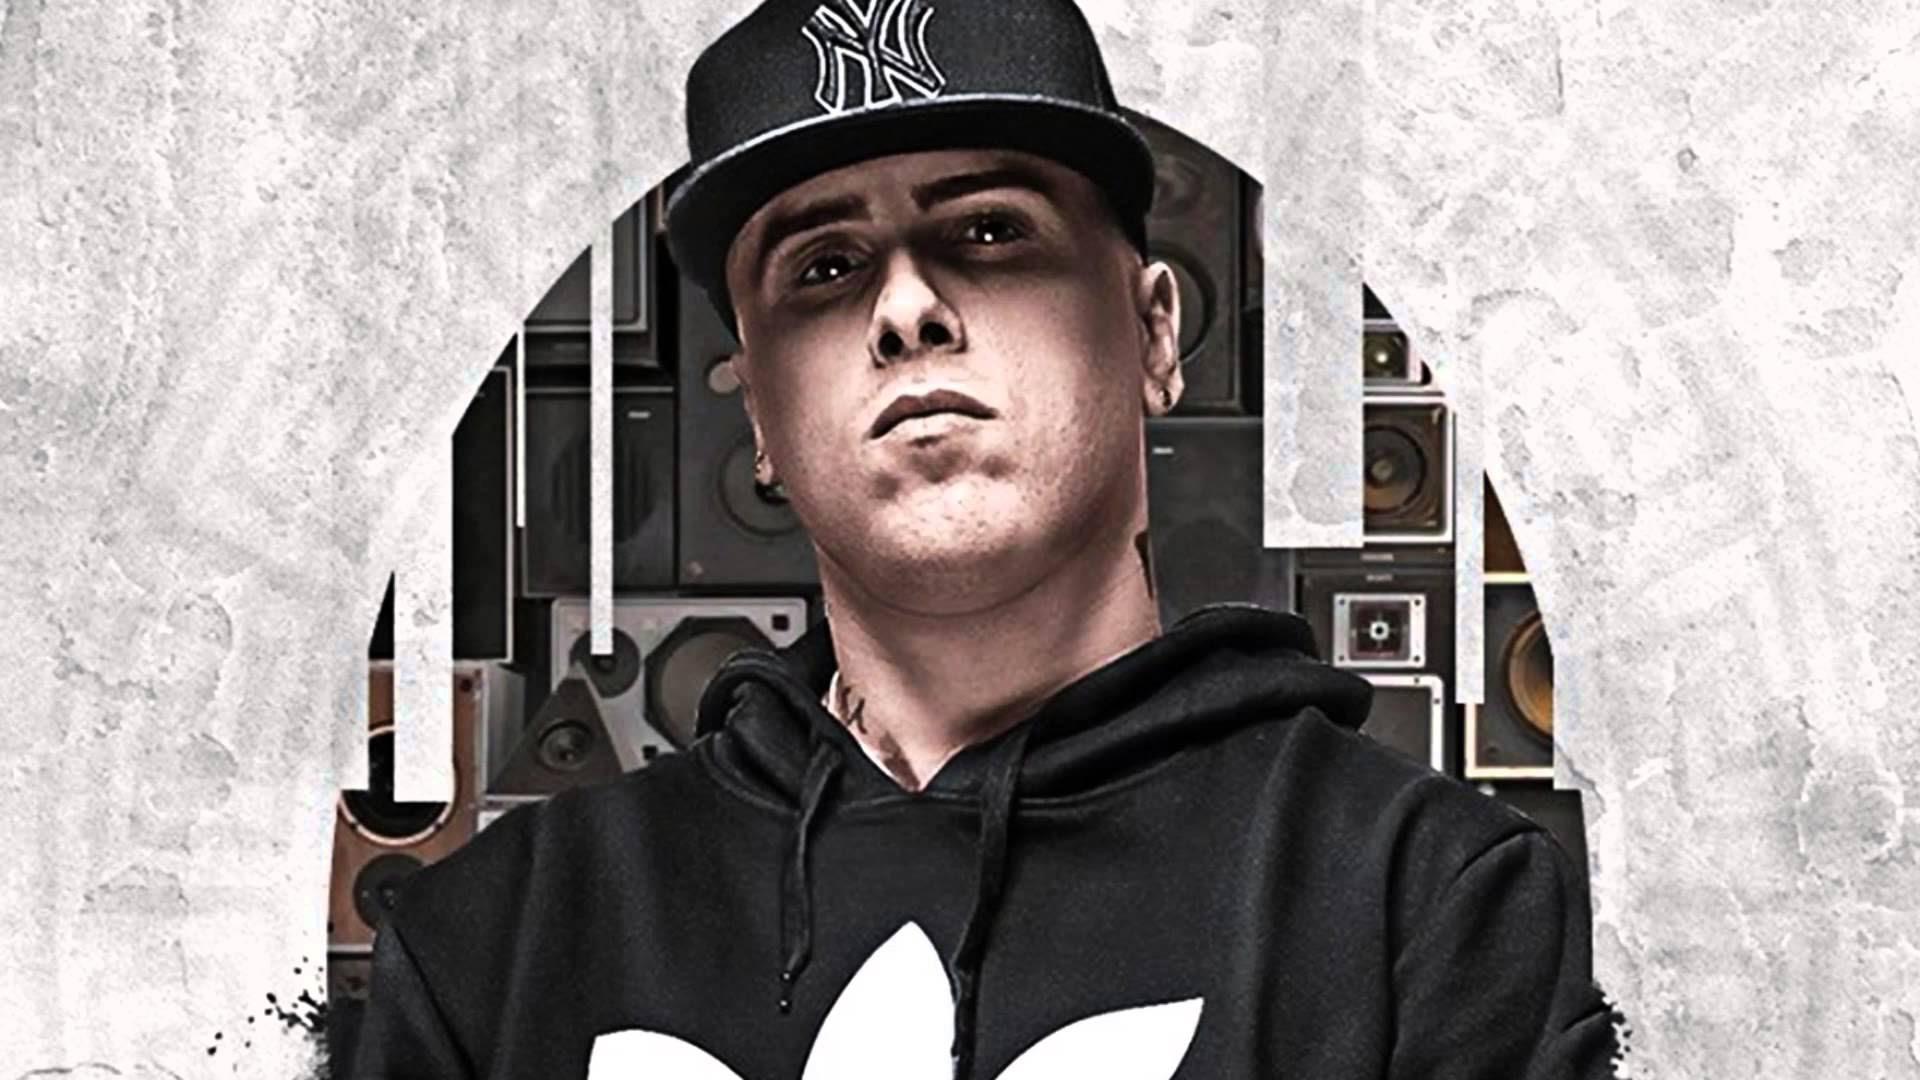 Nicky Jam Ft. Piso 21 Llamas (Preview) 2016